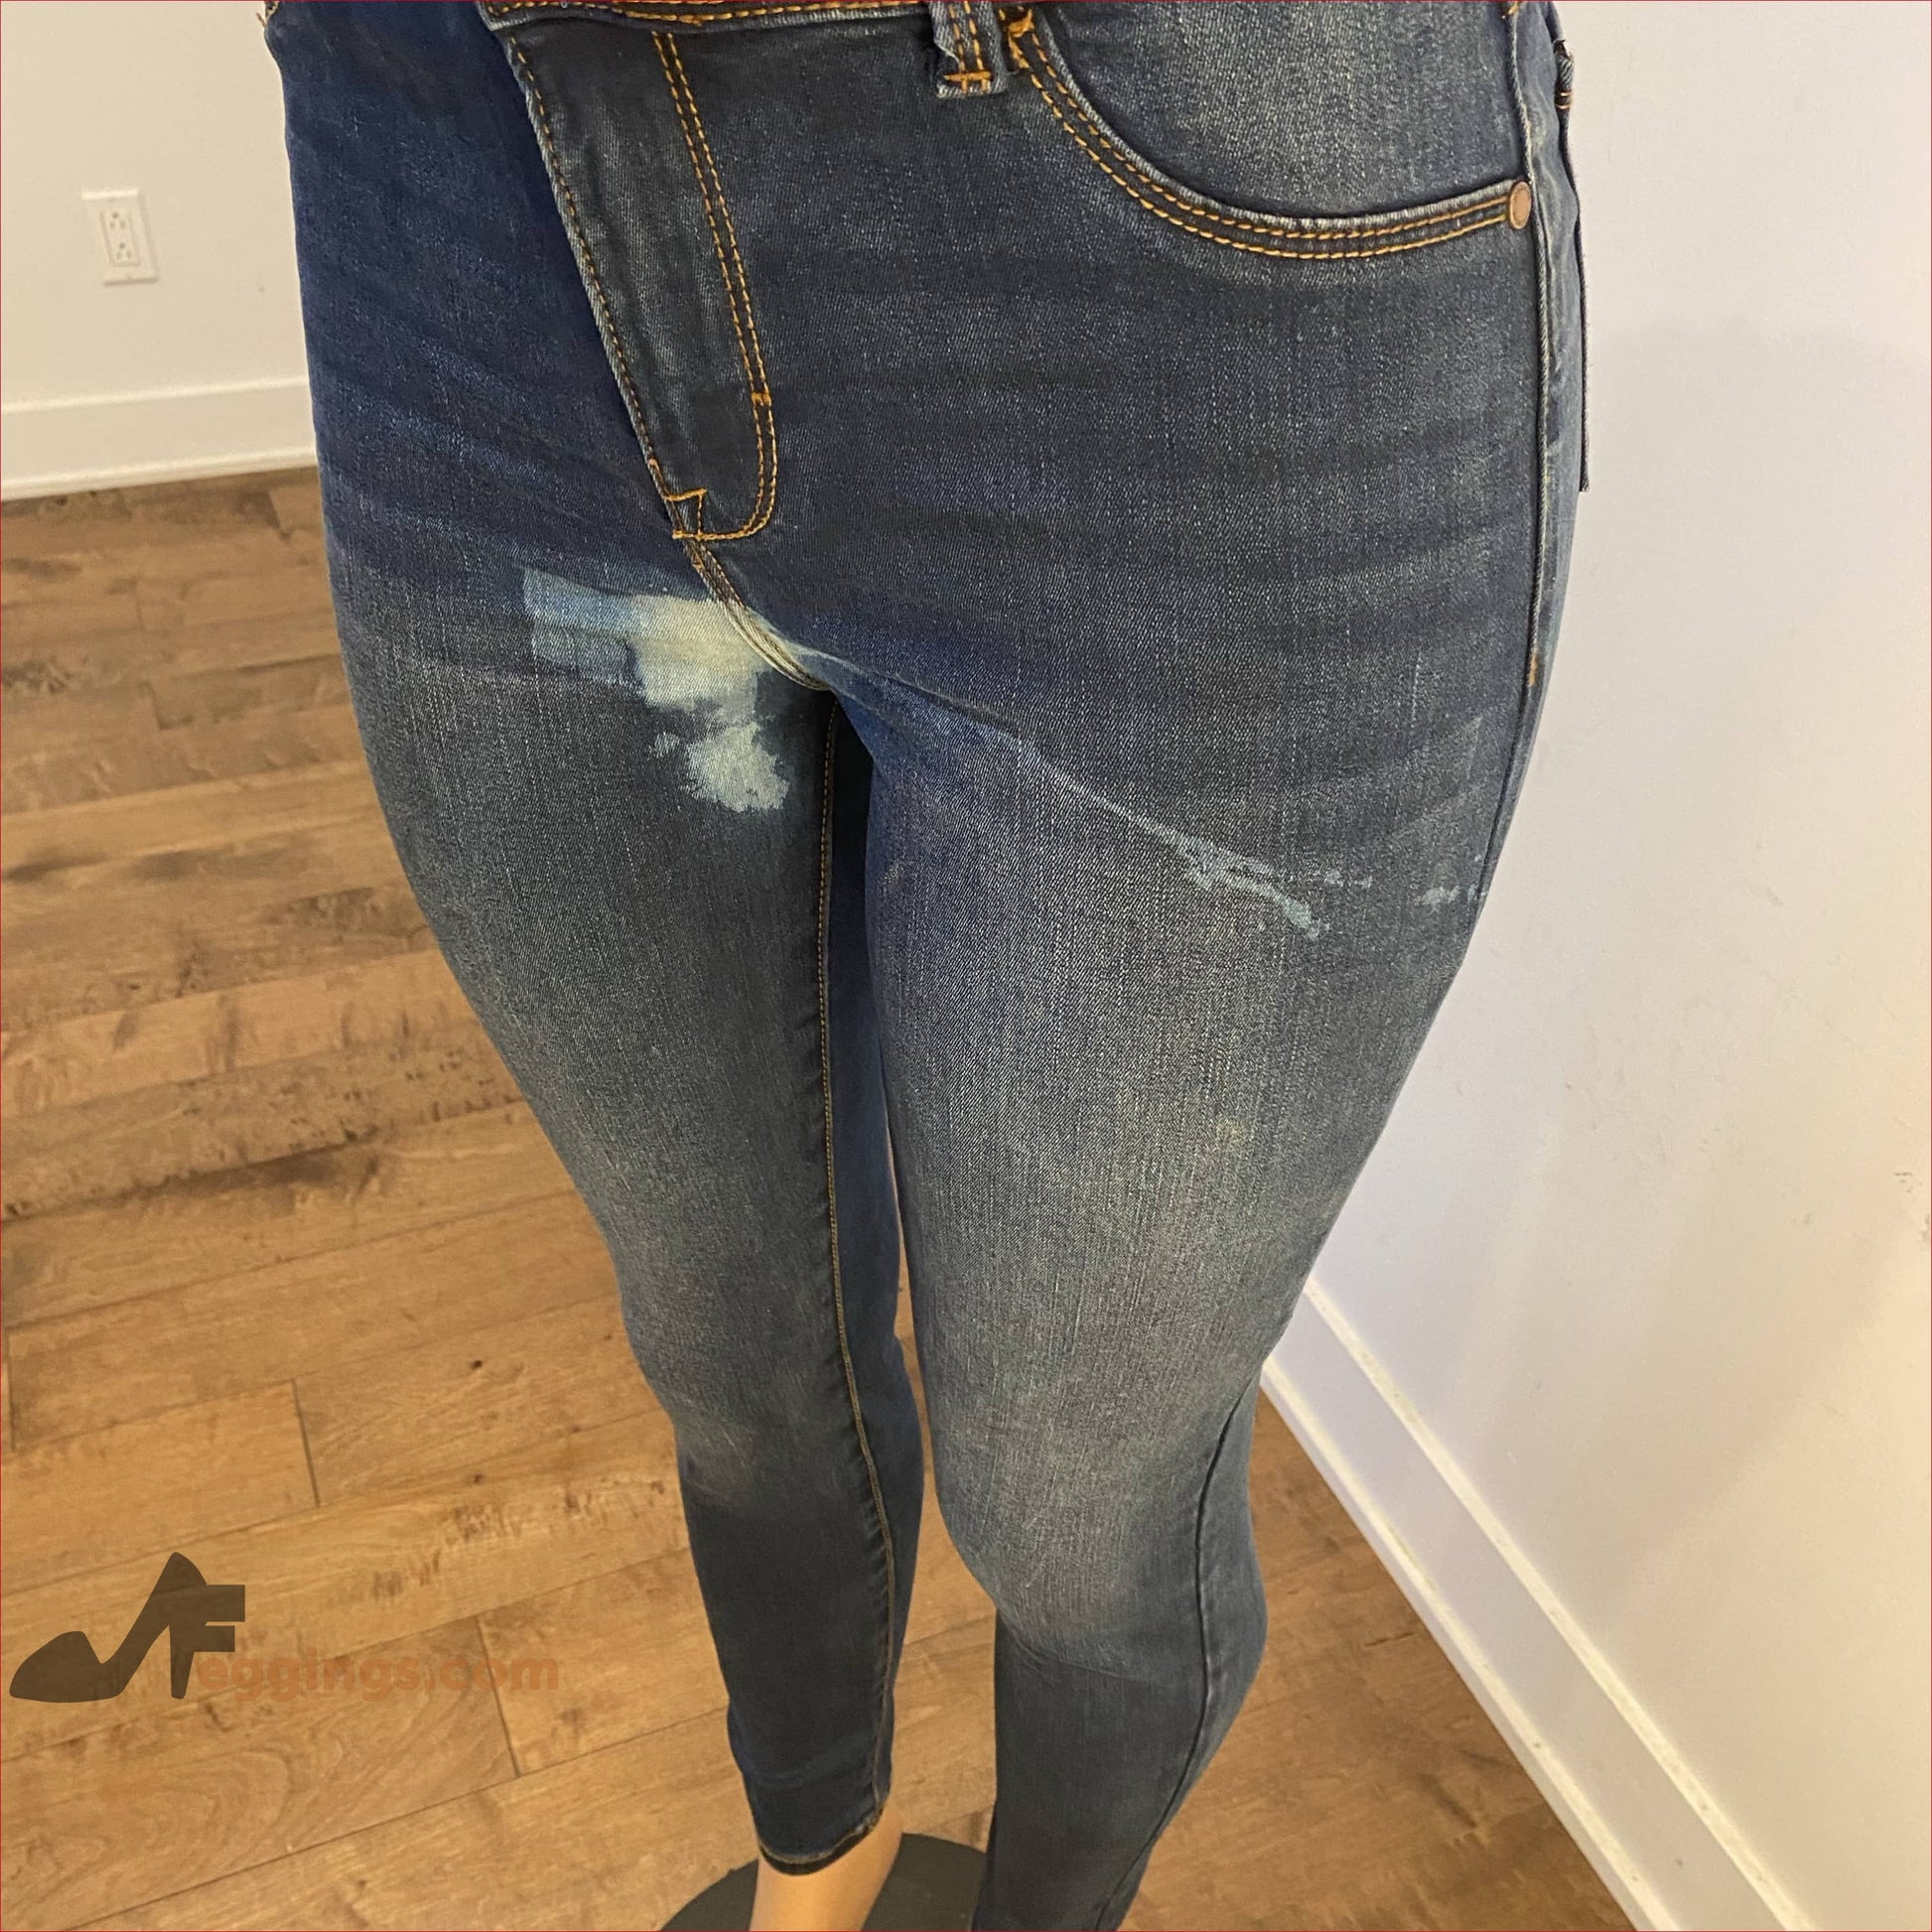 Javex Stained Womens Jeans Purposely